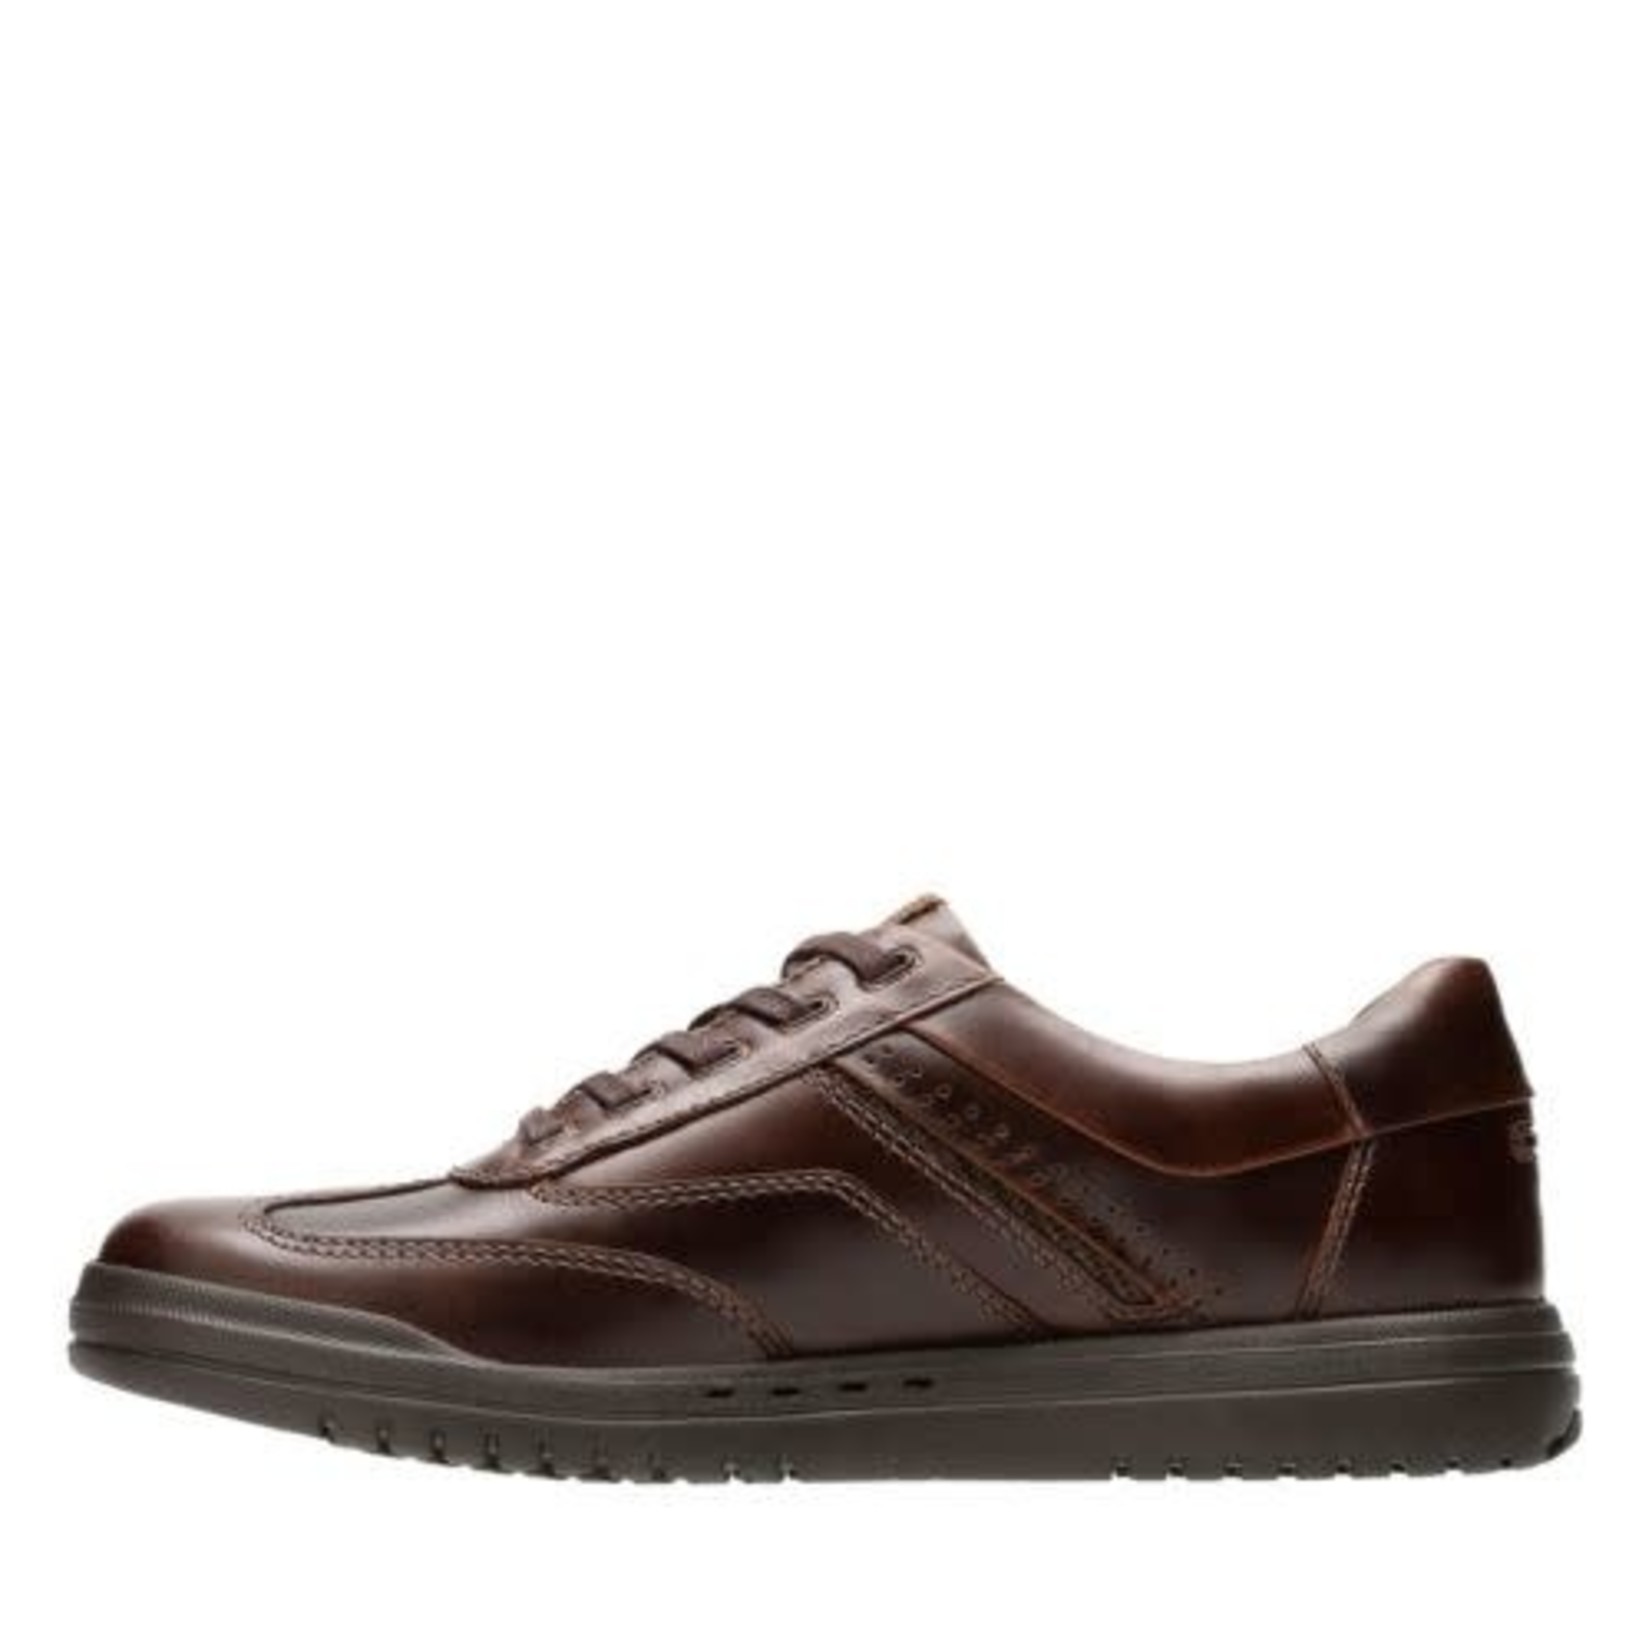 CLARKS CLARKS- UNRHOMBUS FLY- BROWN LEATHER